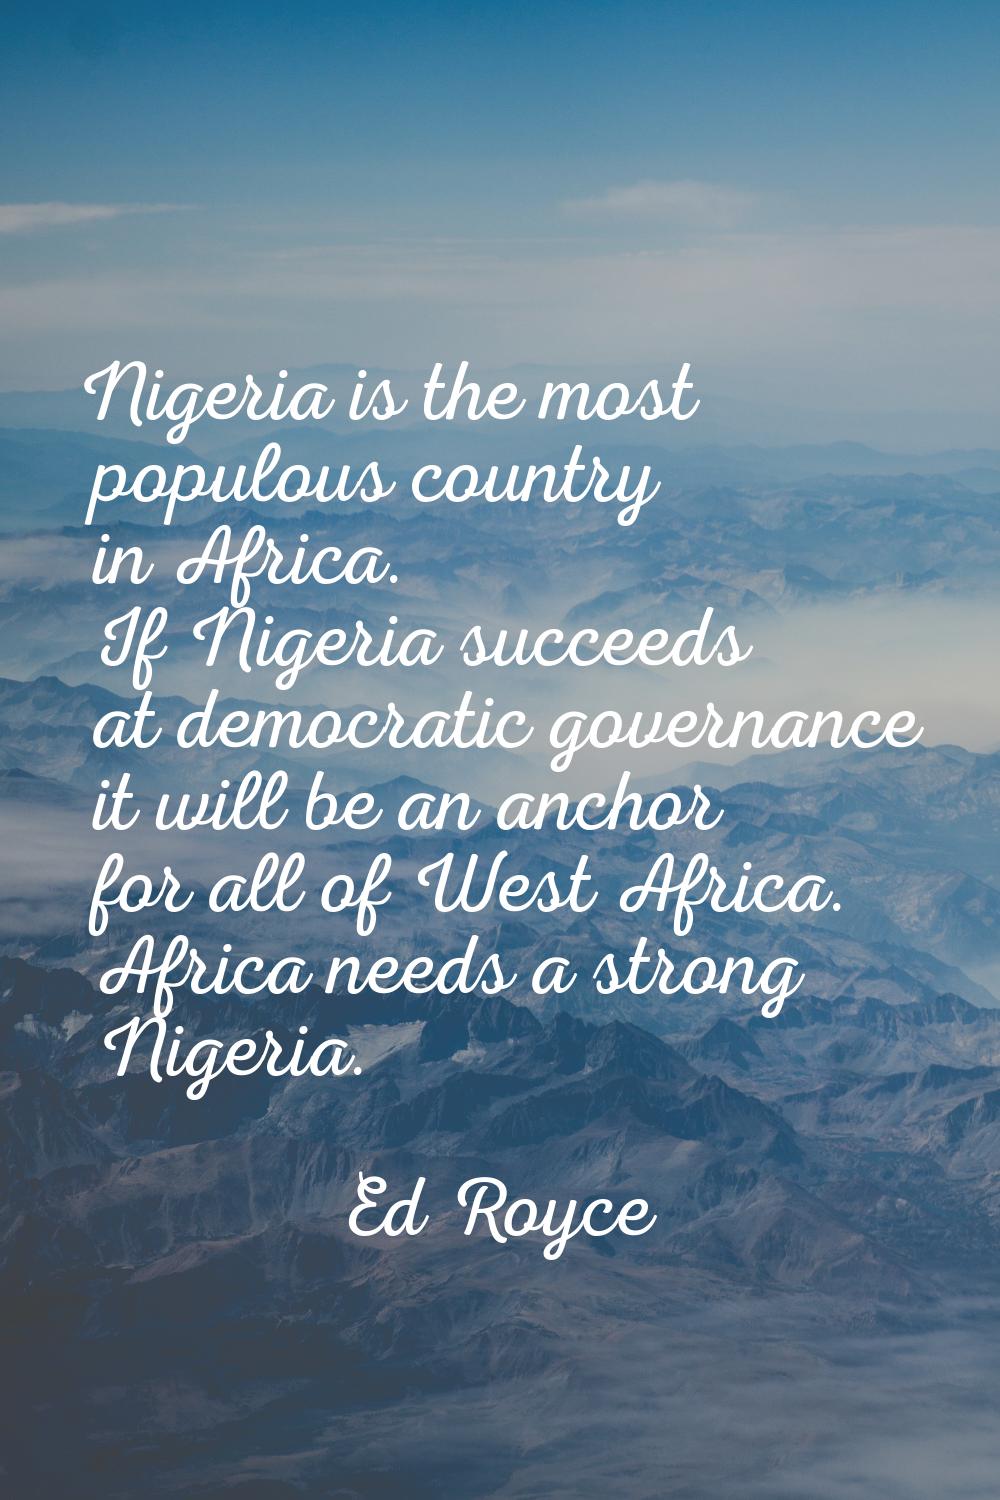 Nigeria is the most populous country in Africa. If Nigeria succeeds at democratic governance it wil